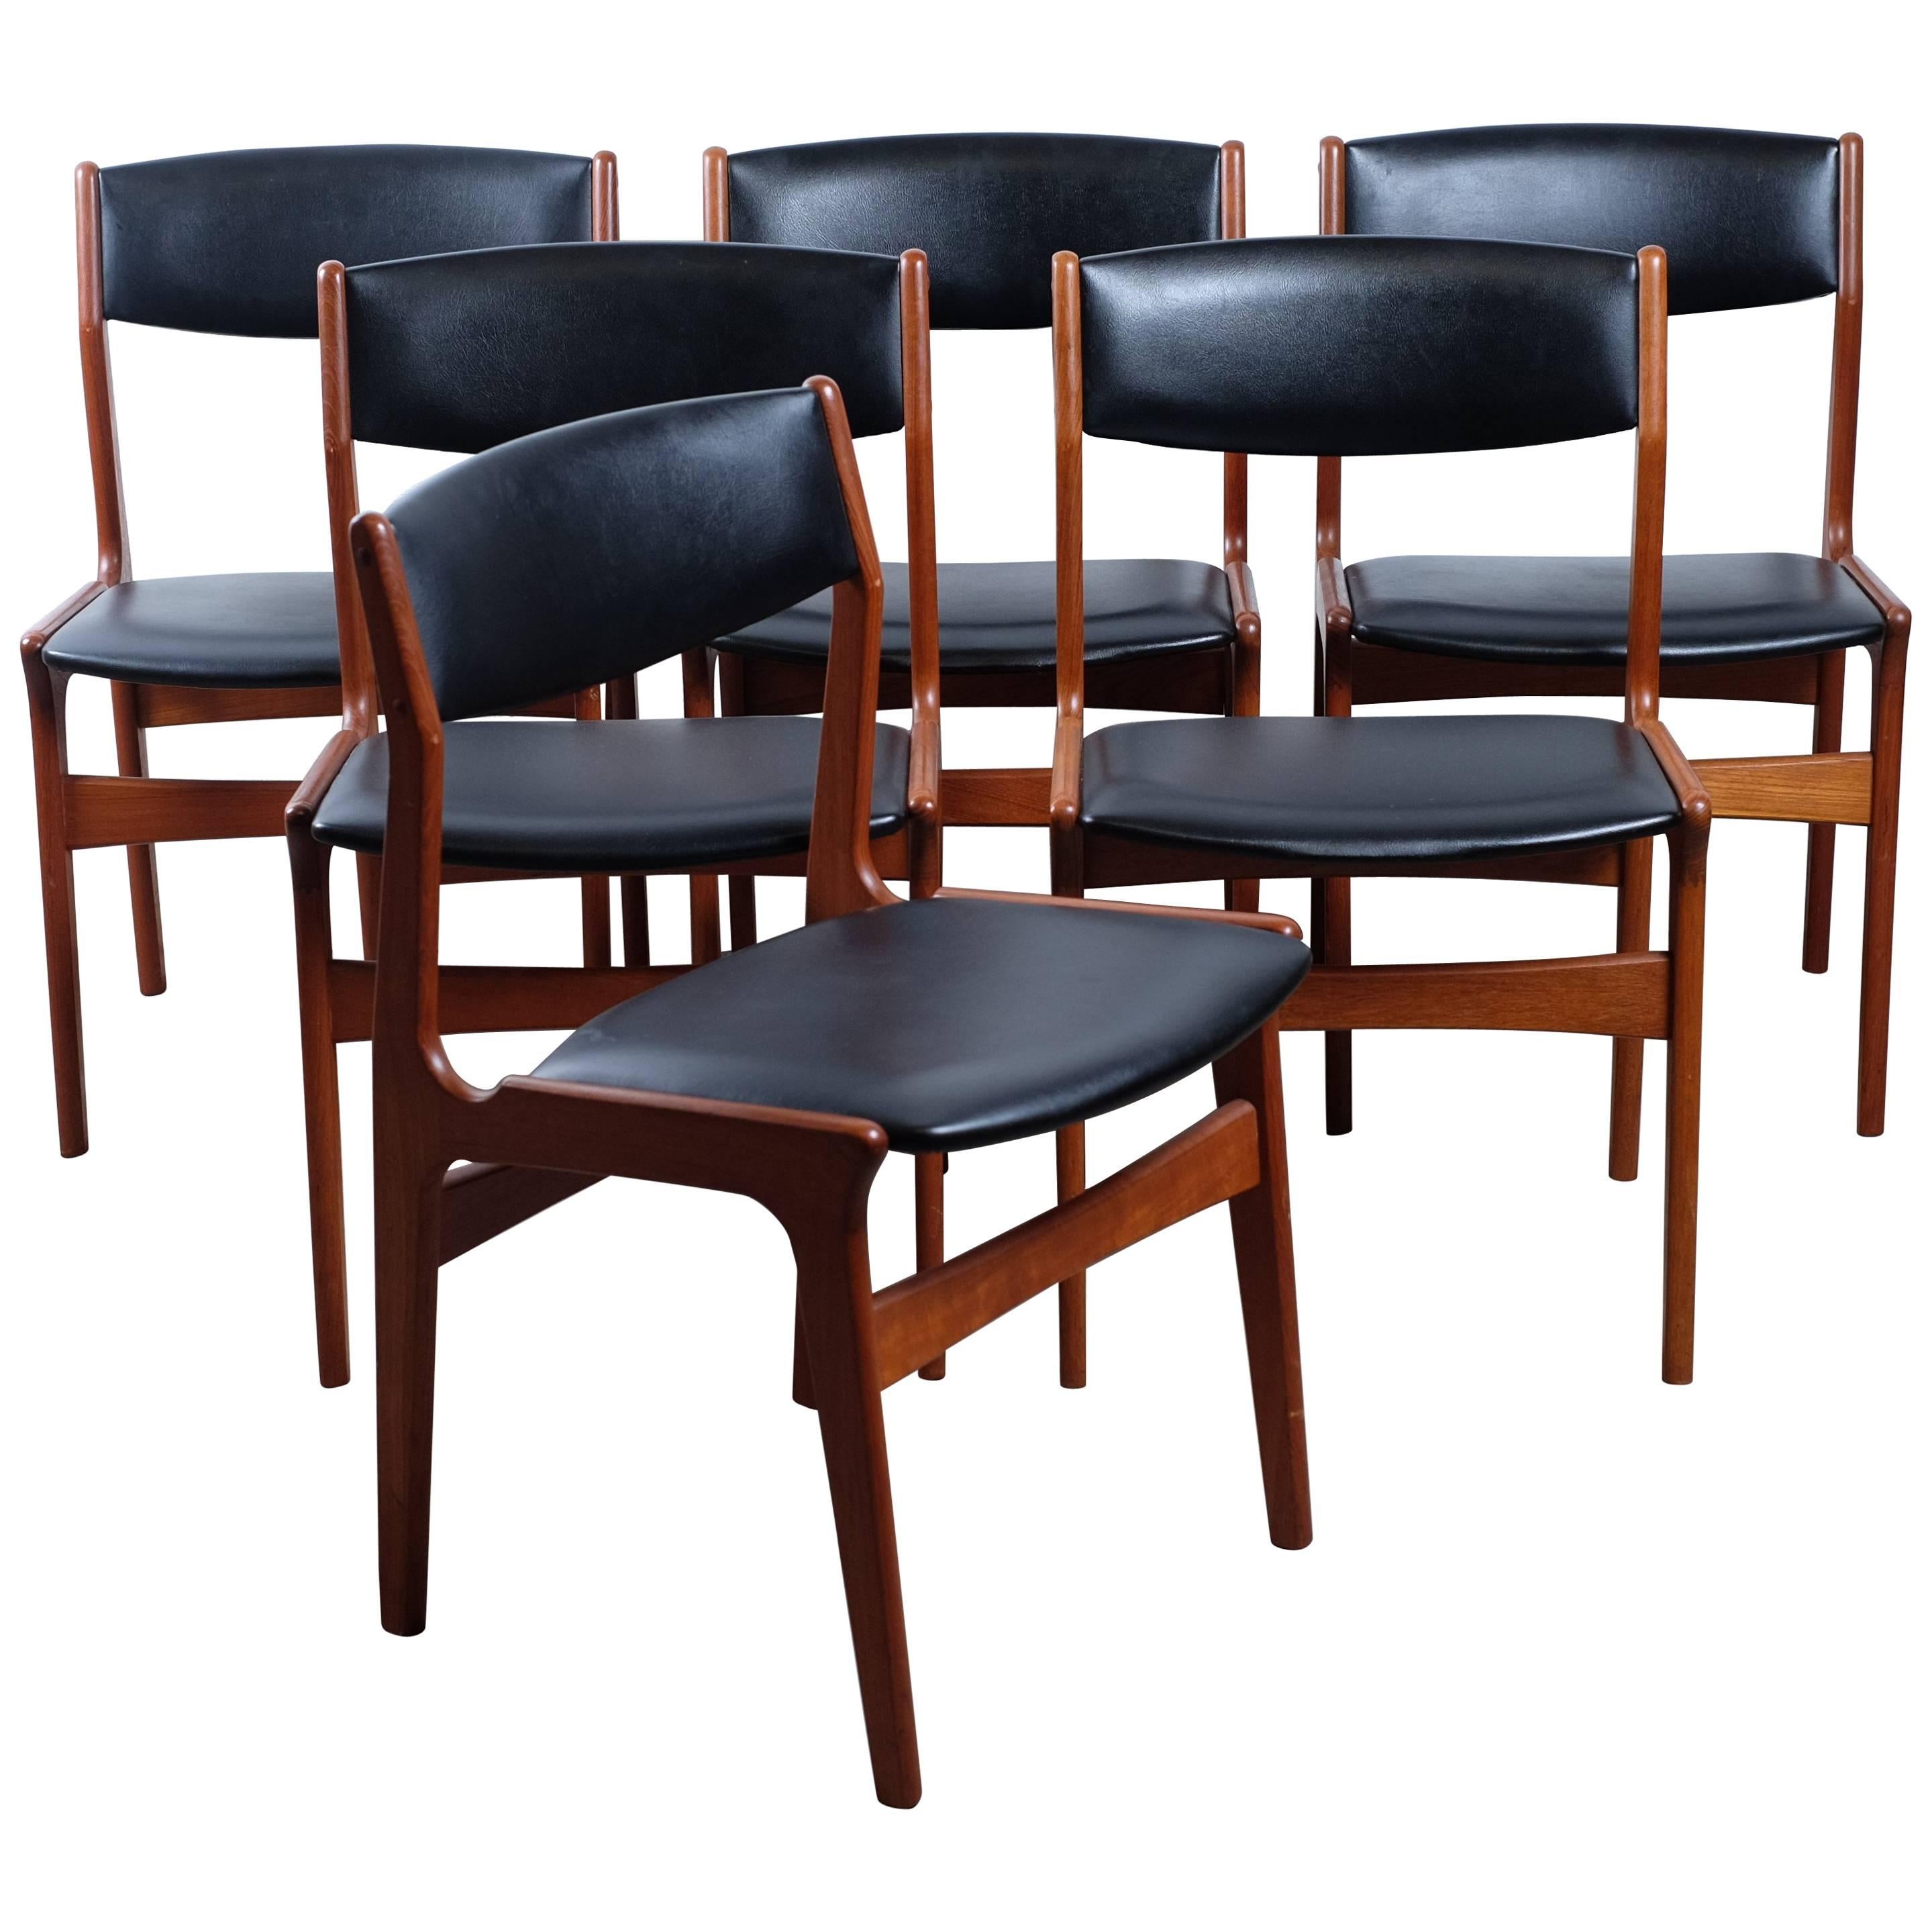 Set of Six Dining Chairs in Teak by Nova, Danish Design For Sale